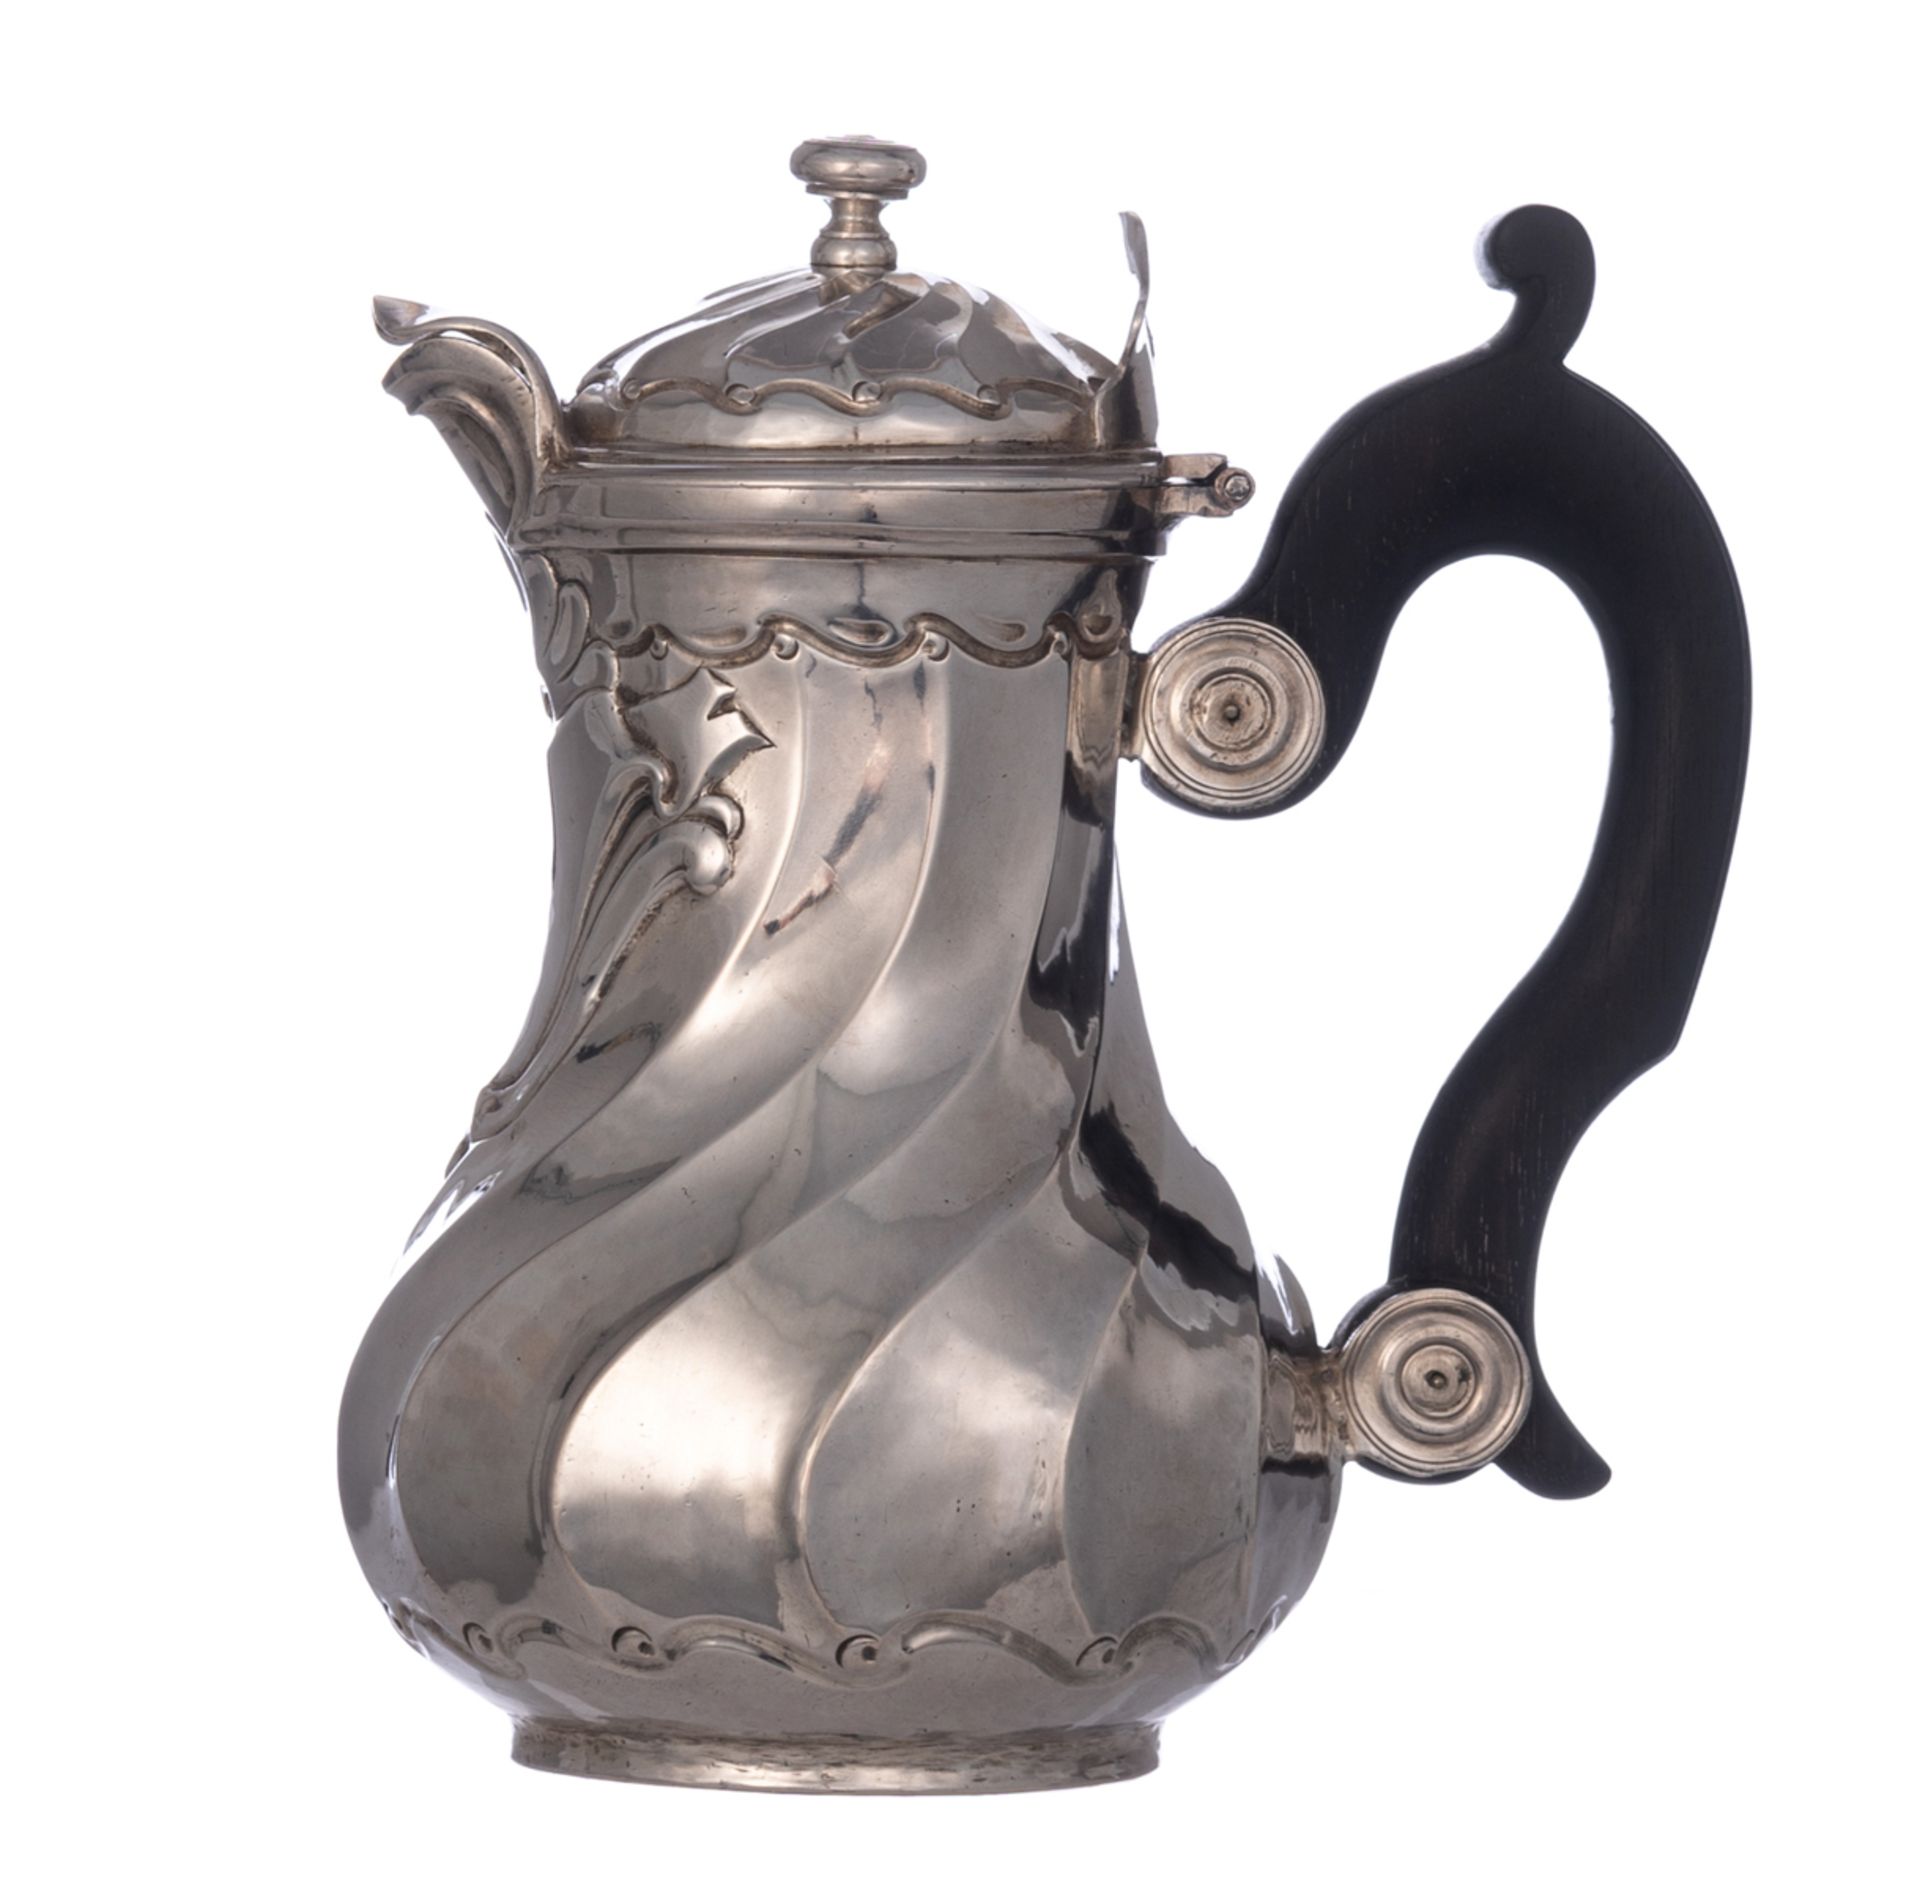 An 18thC French silver Rococo 'solitaire' coffee pot with an ebony handle, illegibly hallmarked, H 1